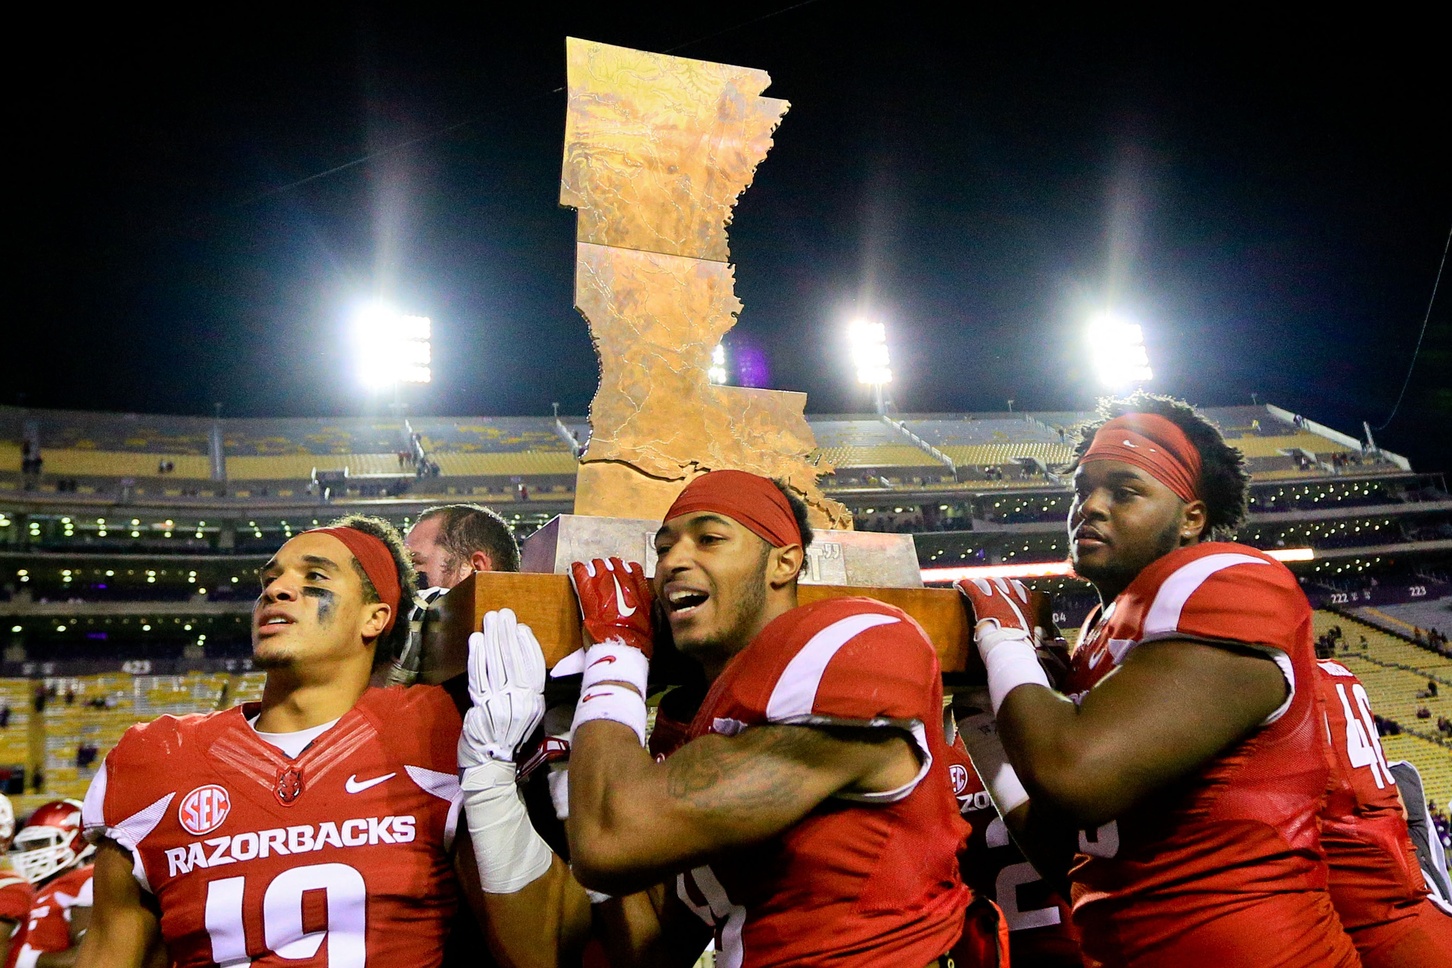 Nov 14, 2015; Baton Rouge, LA, USA; The Arkansas Razorbacks players carry The Boot trophy after defeating the LSU Tigers 31-14 at Tiger Stadium. Mandatory Credit: Derick E. Hingle-USA TODAY Sports